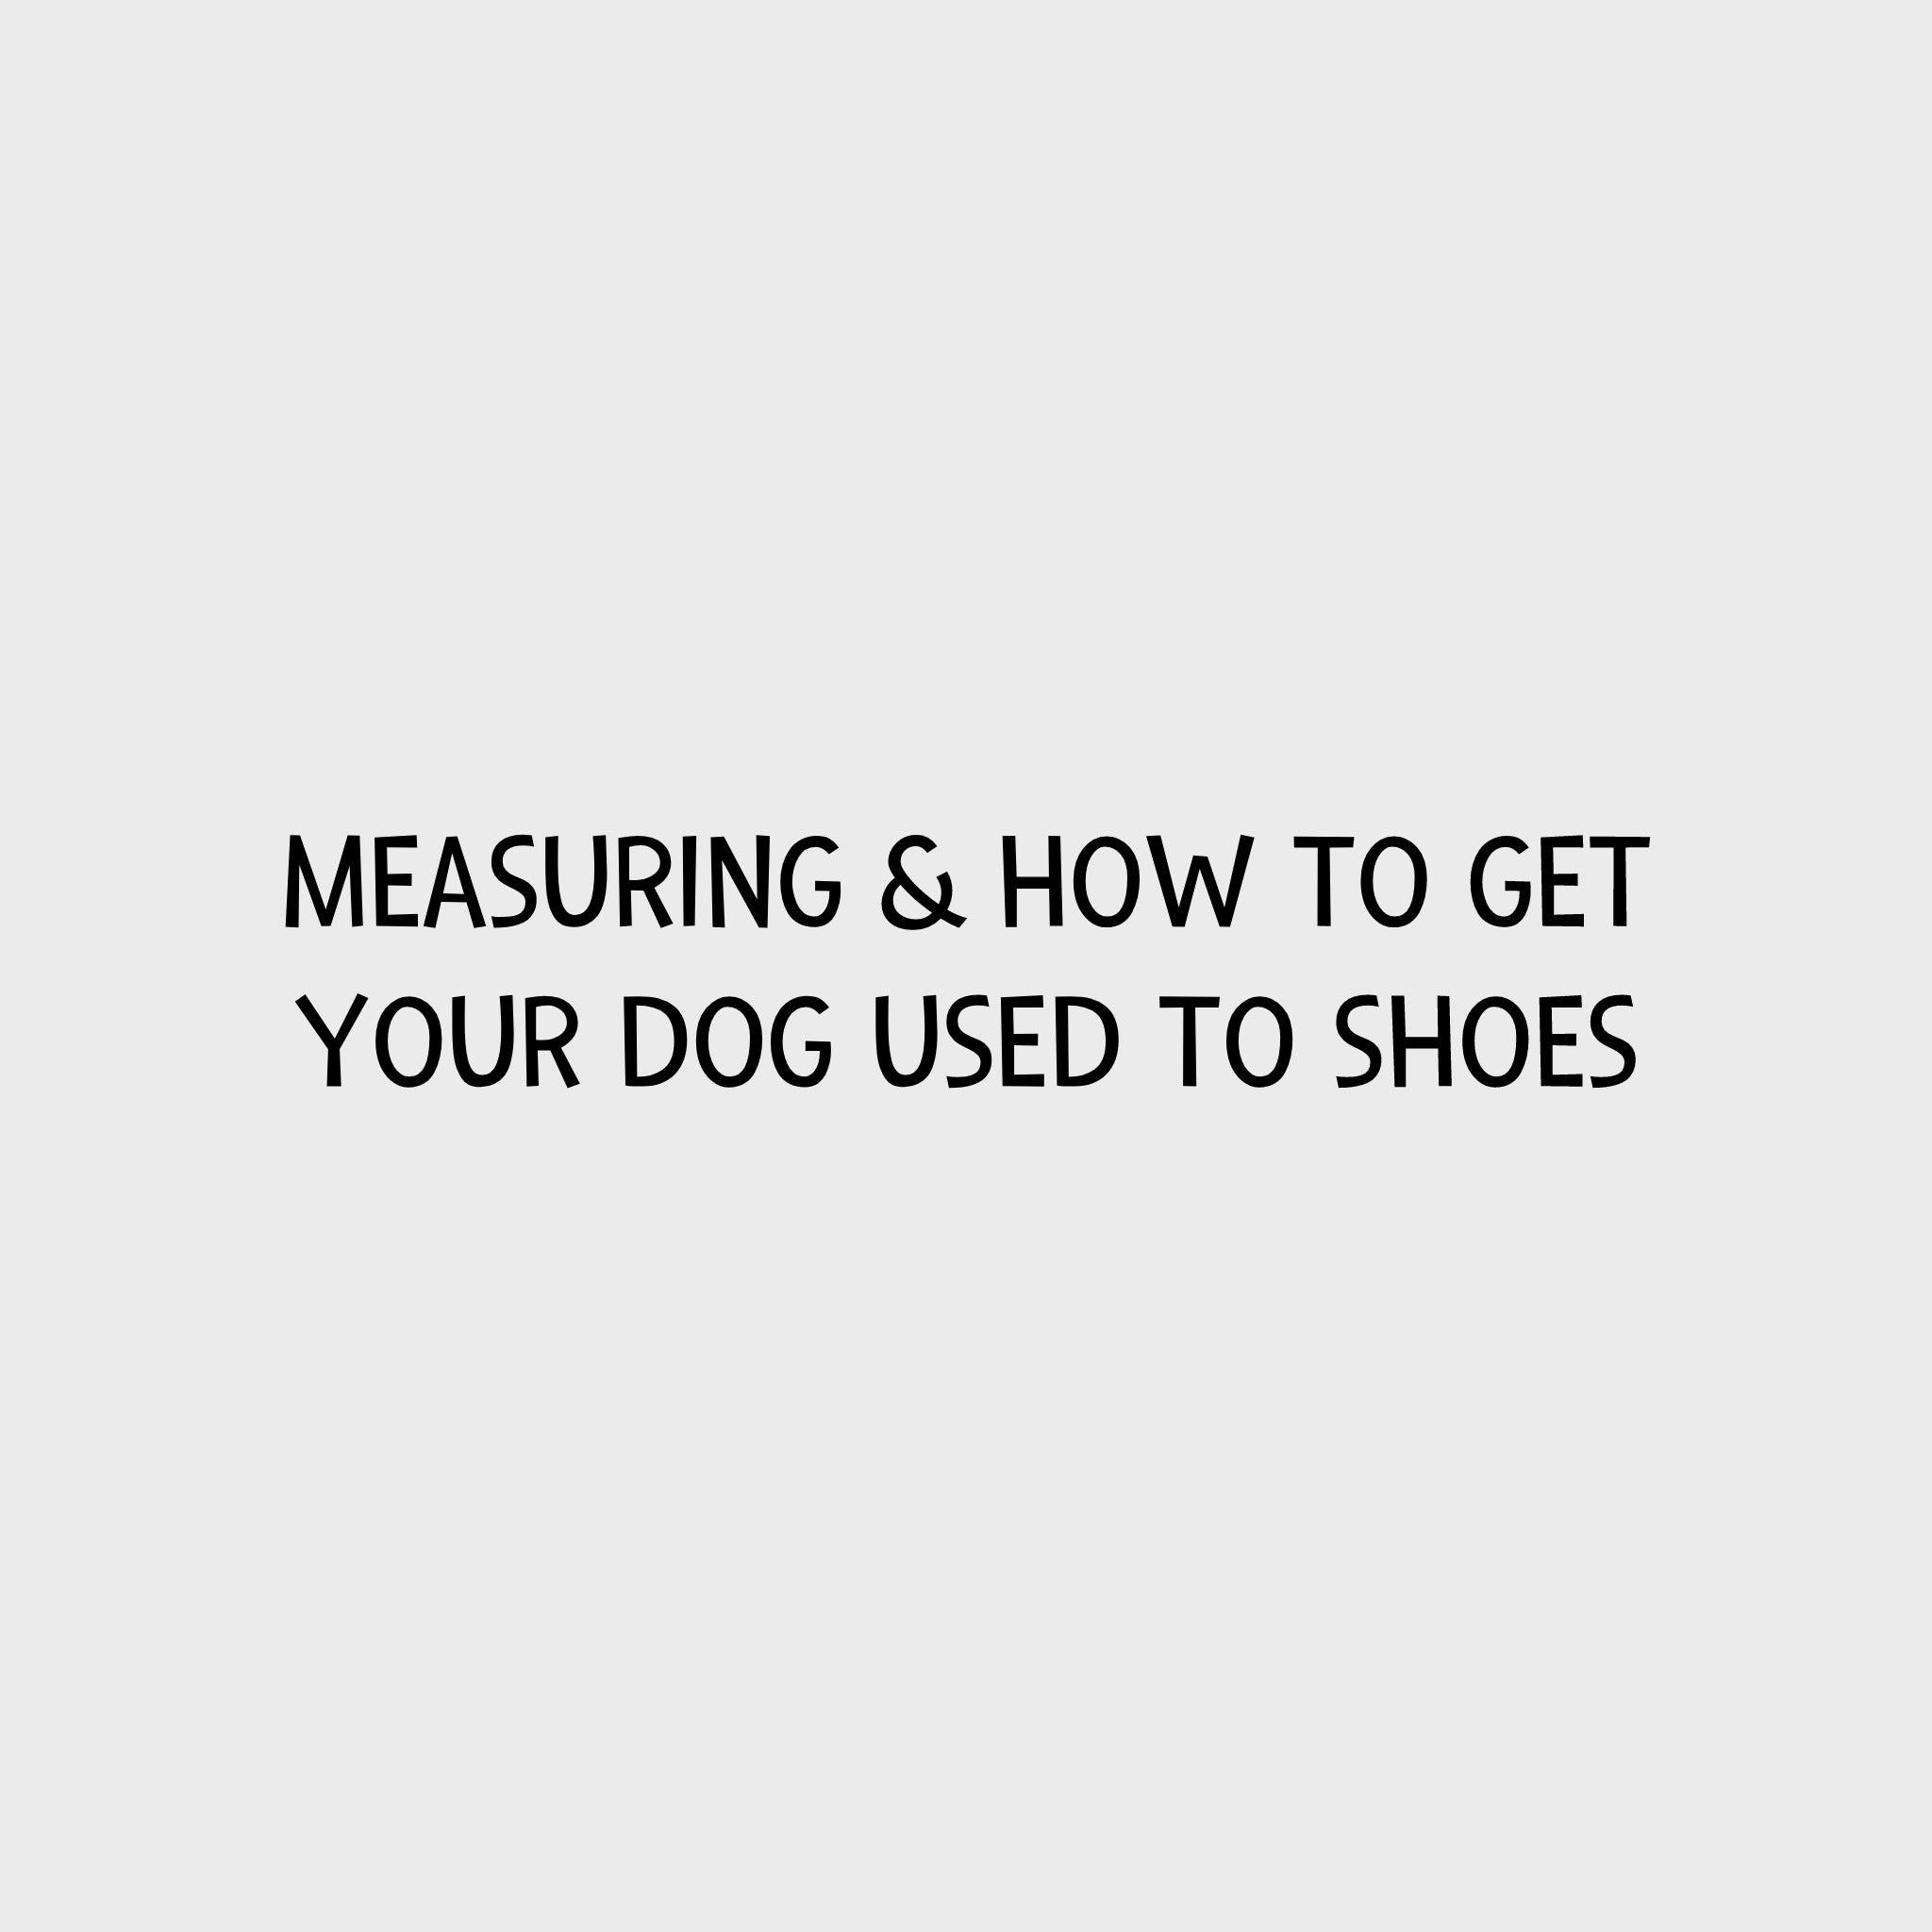 Video - Kurgo Measuring & How to get your dog used to shoes